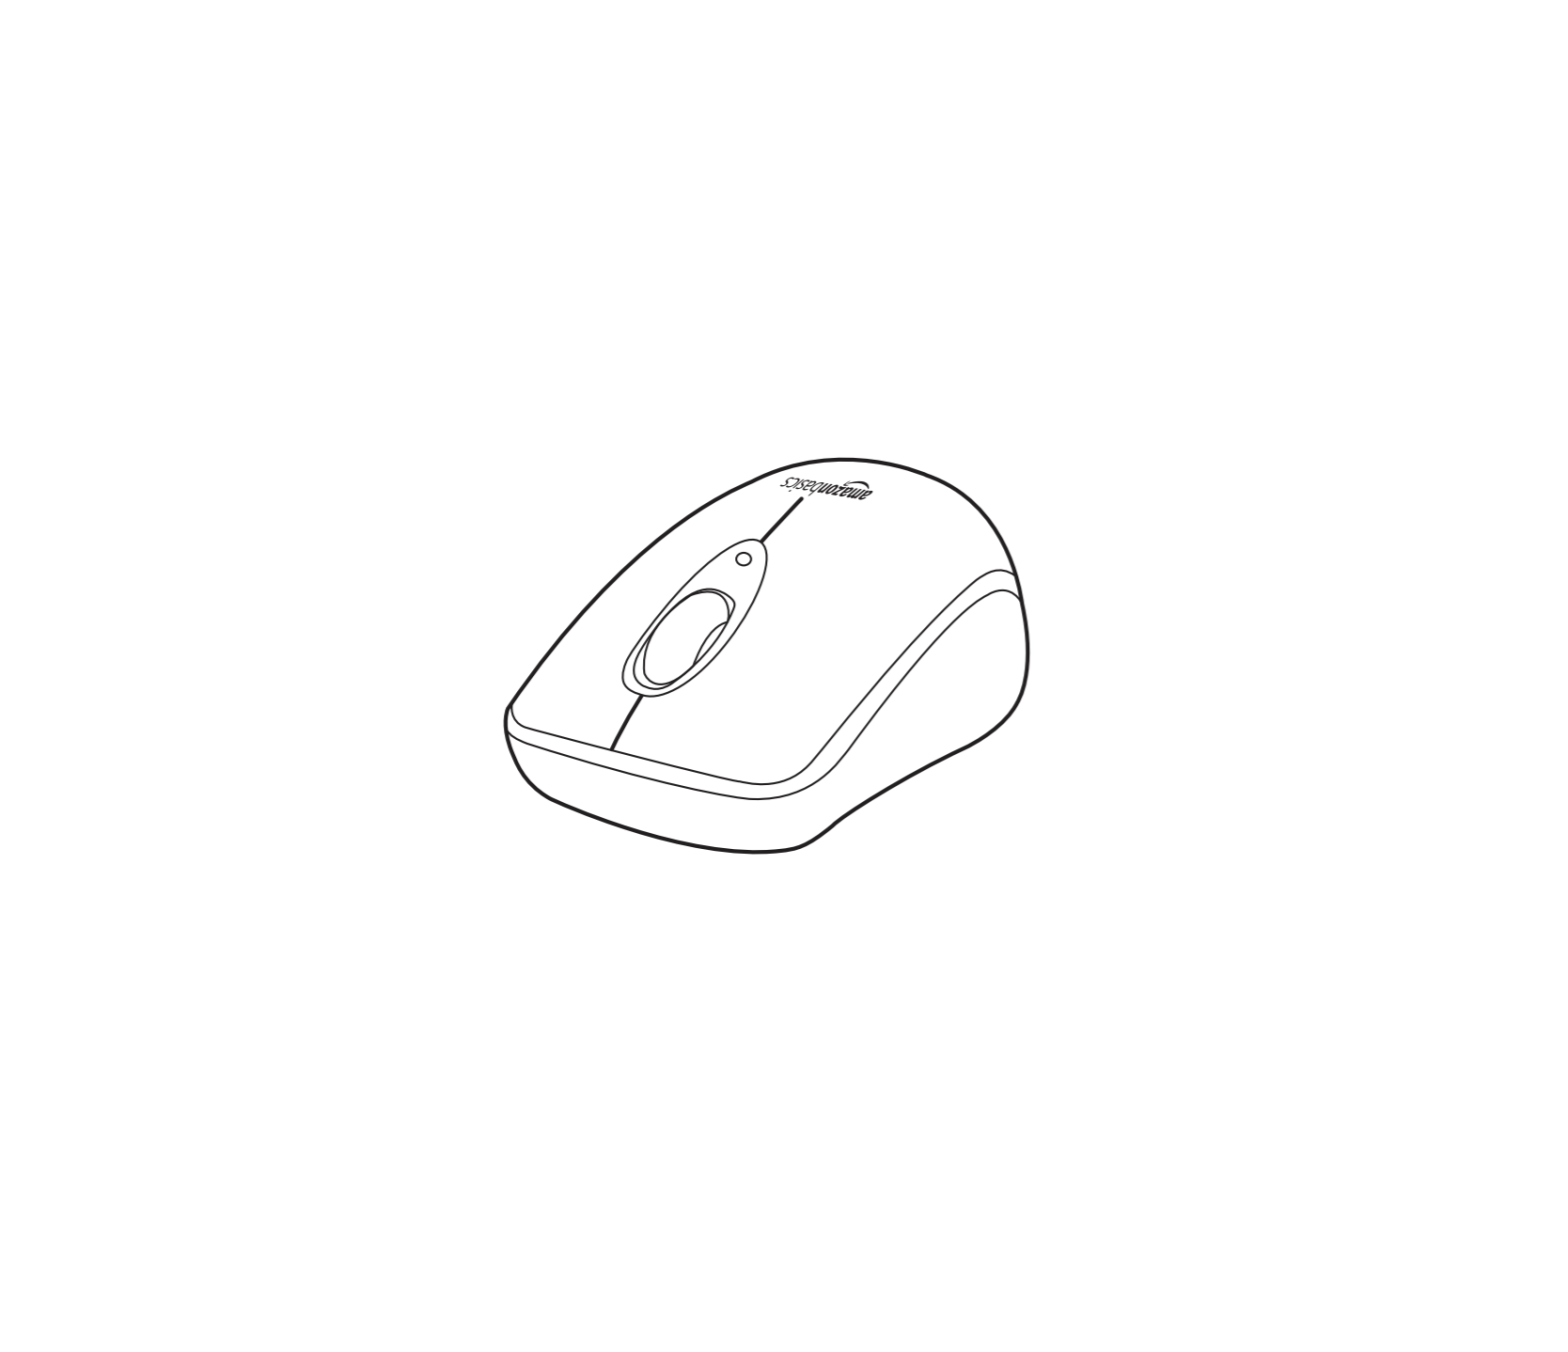 amazon basics M8126AR01 Wireless Mouse with Nano Receiver User Manual